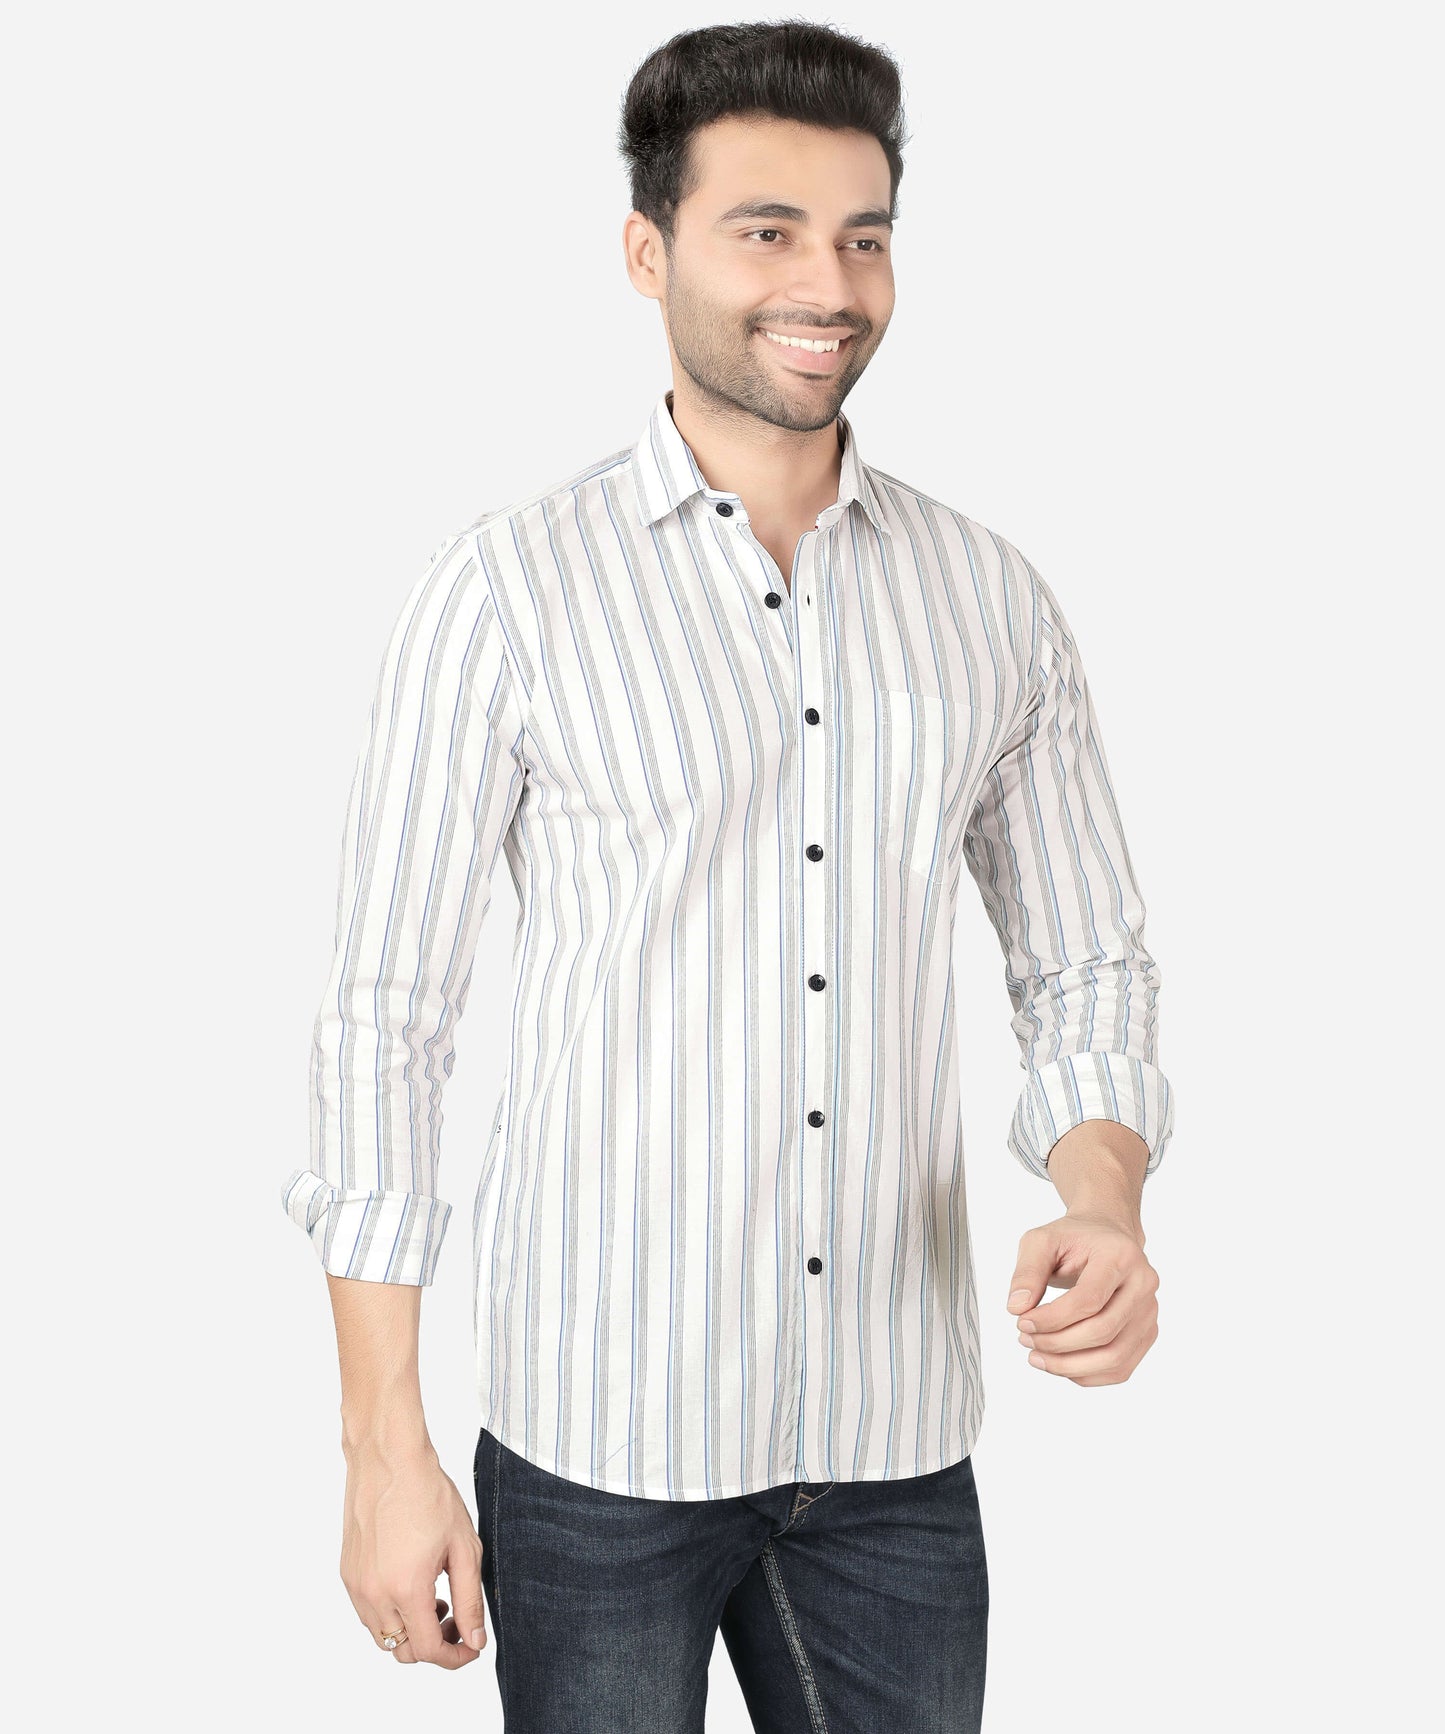 5thanfold Men's Casual Pure Cotton Full Sleeve Checkered White Slim Fit Shirt